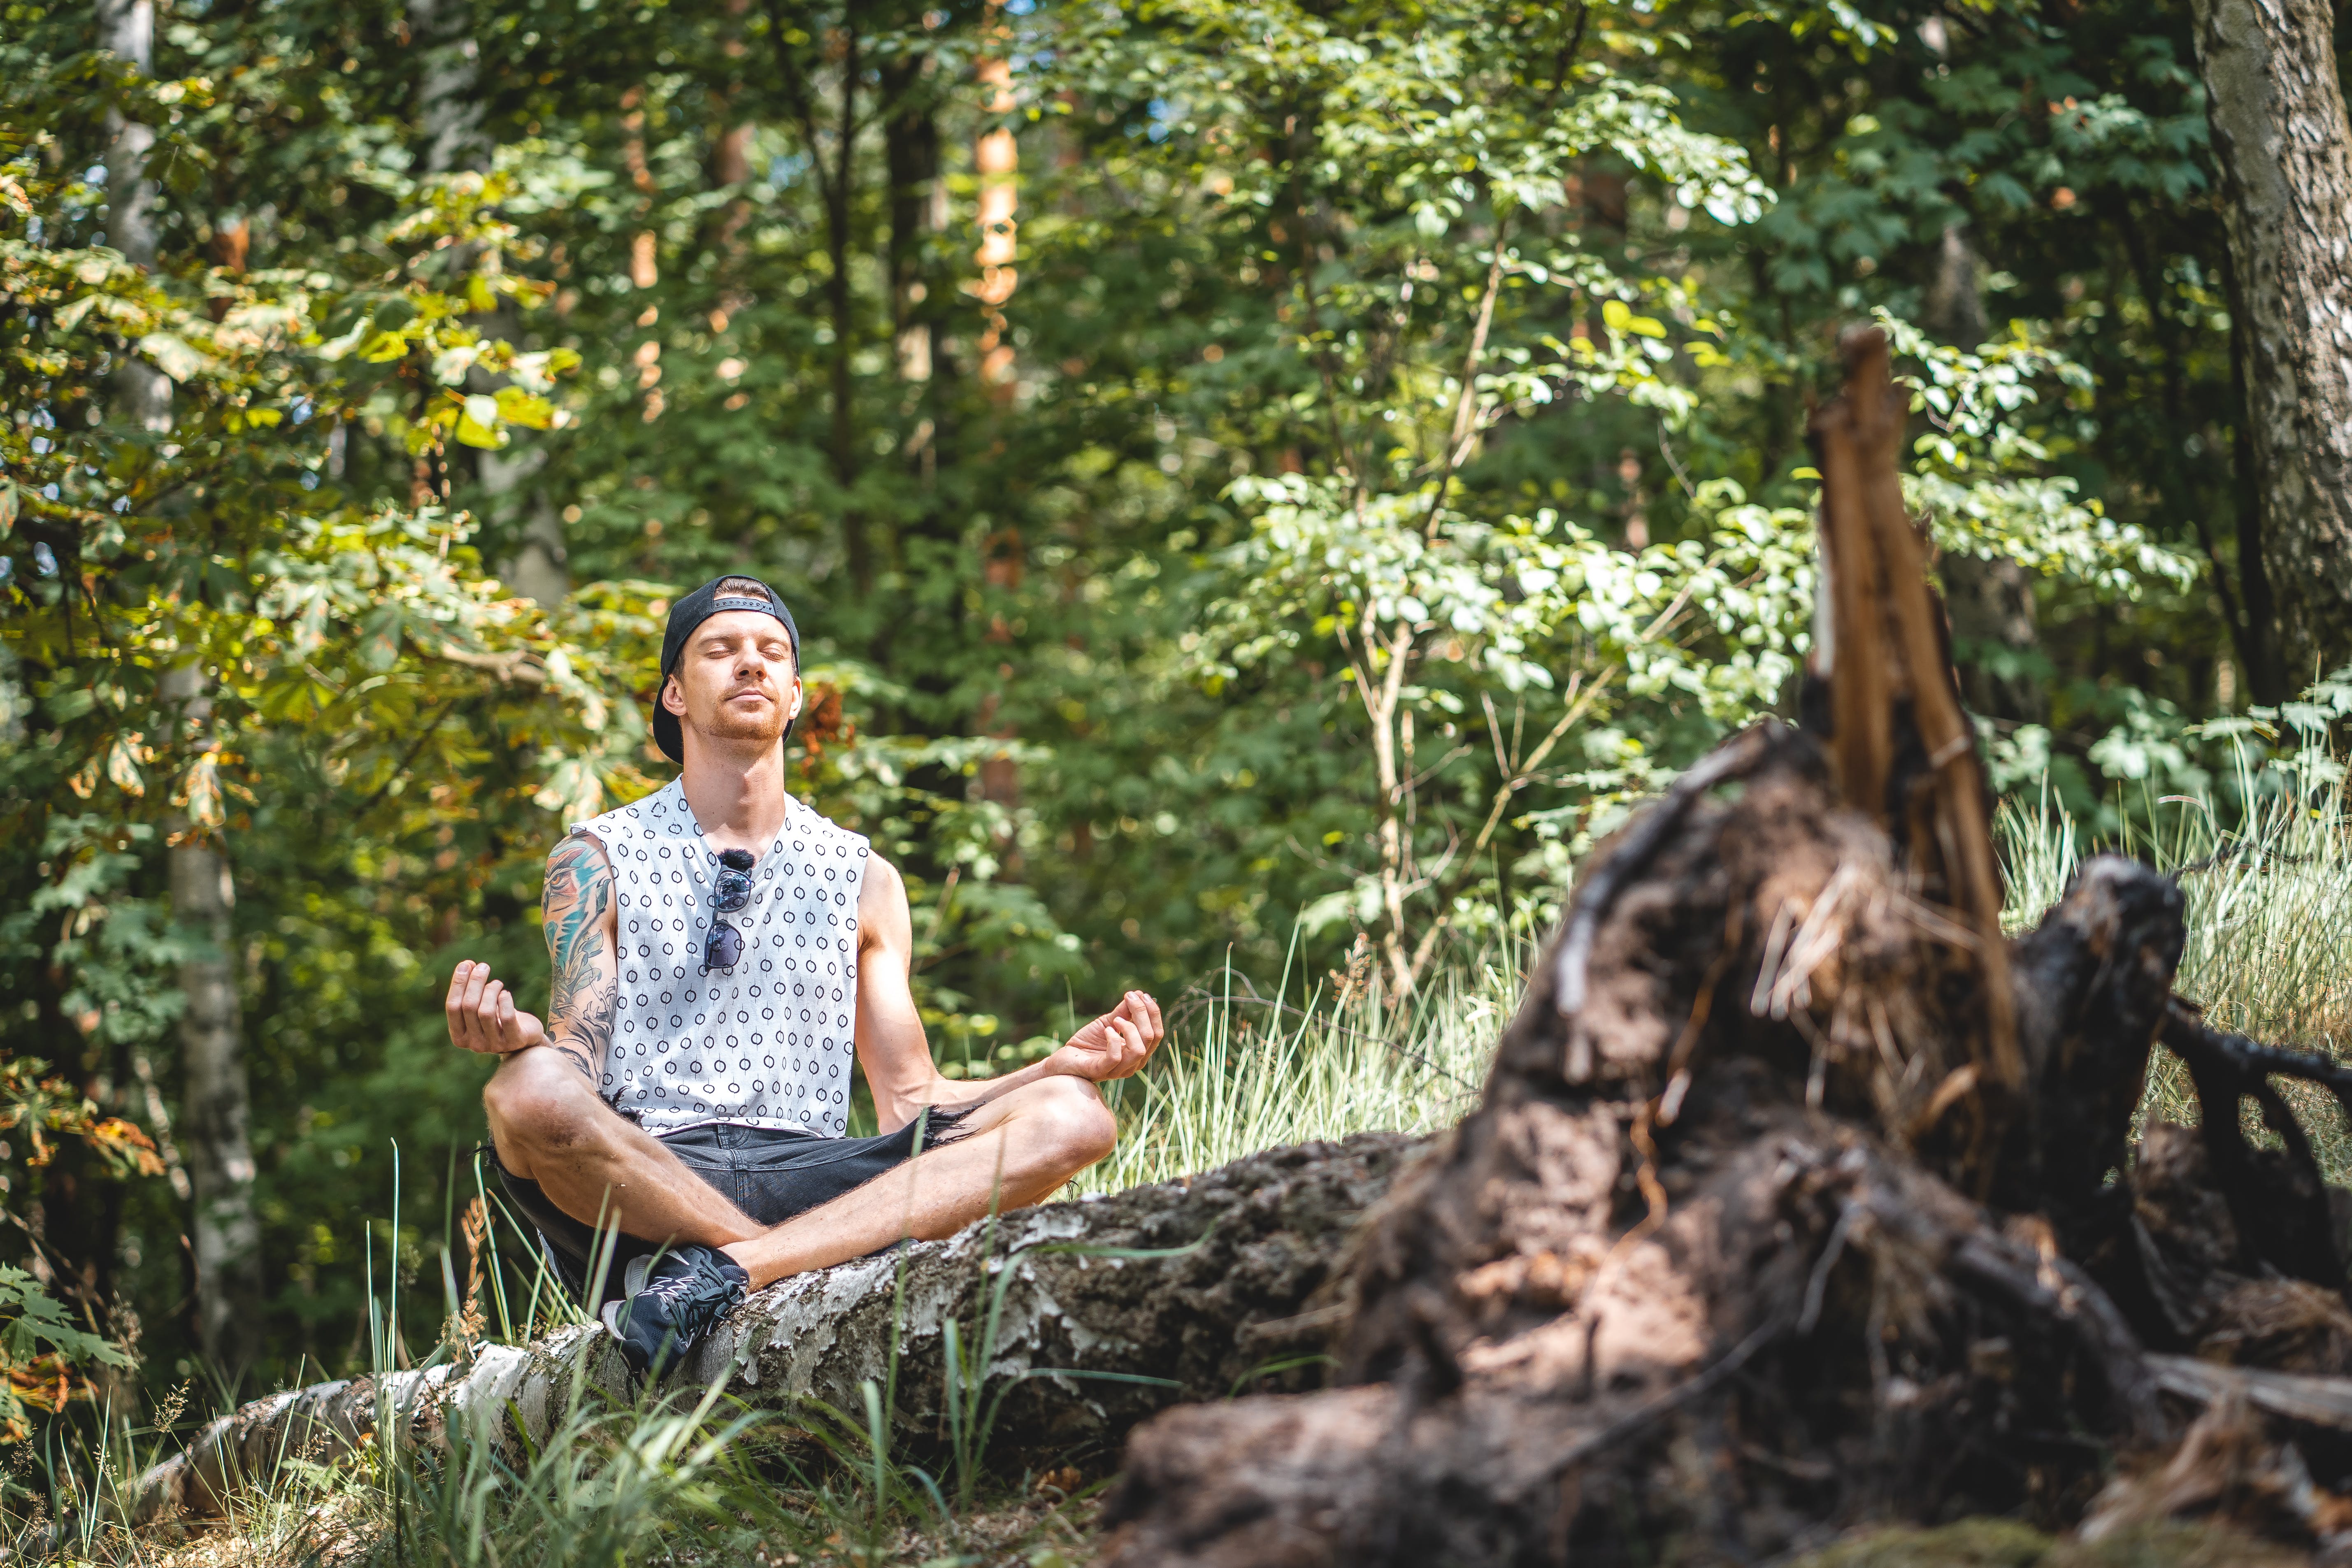 Benefits of mindfulness and meditation for personal well-being